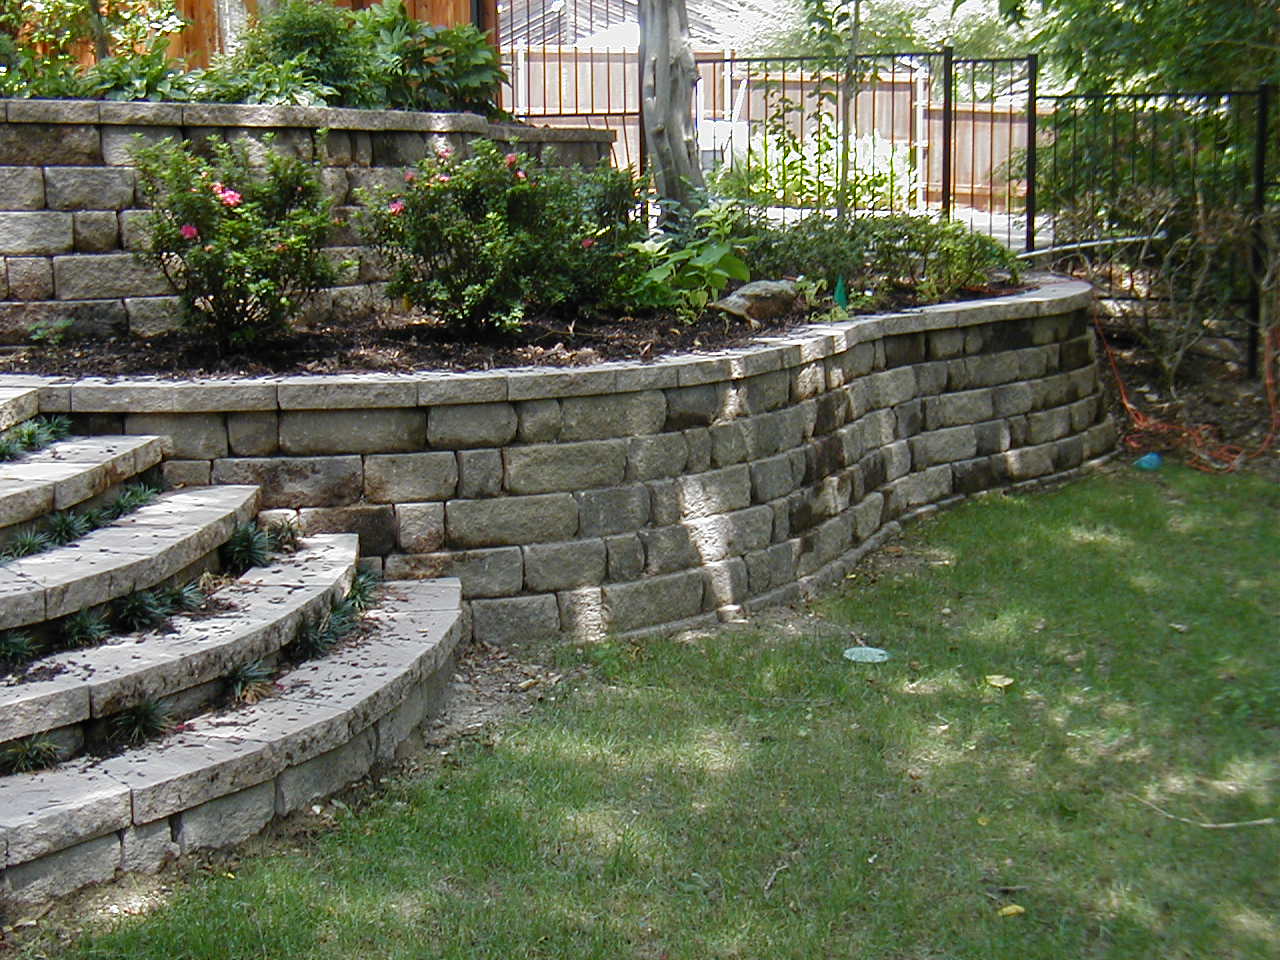 Wall Design Stone Retaining Wall Design Decorated With Stone Material And Green Garden Design Using Small Outdoor Staircase Ideas Garden Retaining Wall Design To Create Beautiful Natural Landscaping Idea In The Yard